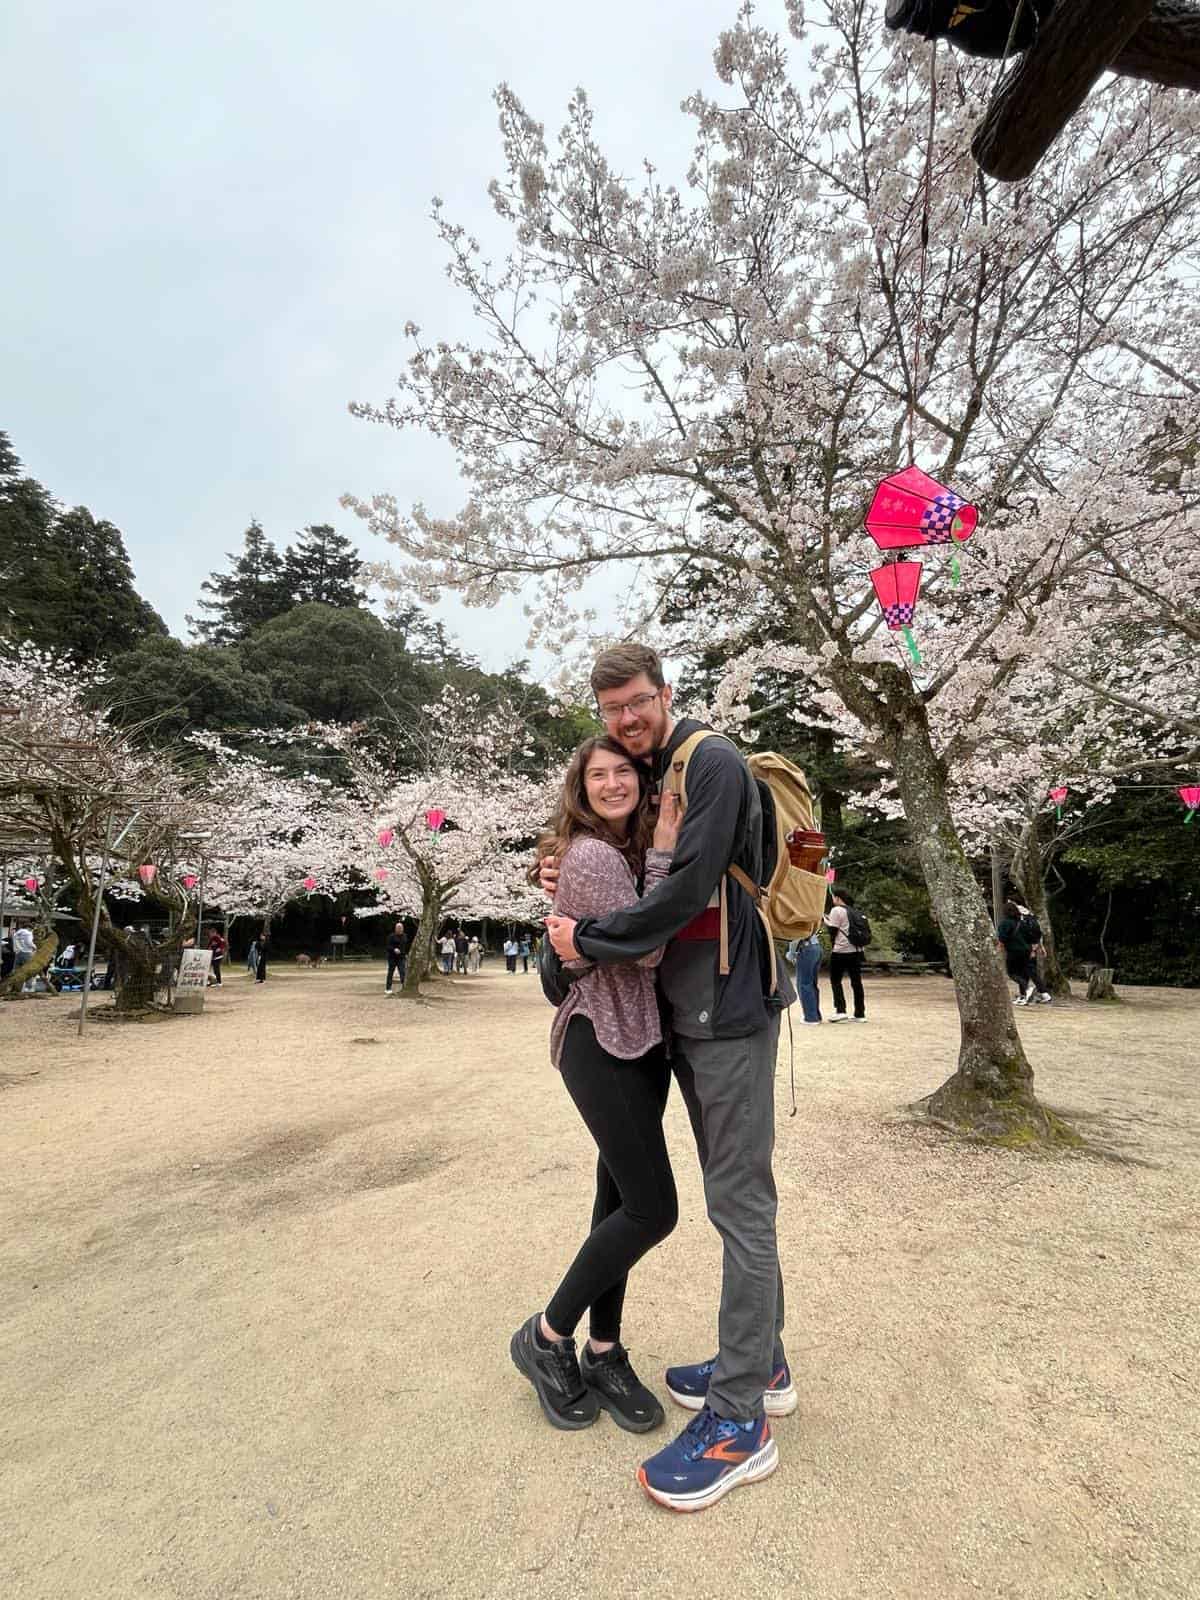 Katie Lumsden, the owner of The Lilac Lion Photography poses with her husband under the Japanese cherry blossoms in full bloom in Hiroshima, Japan.